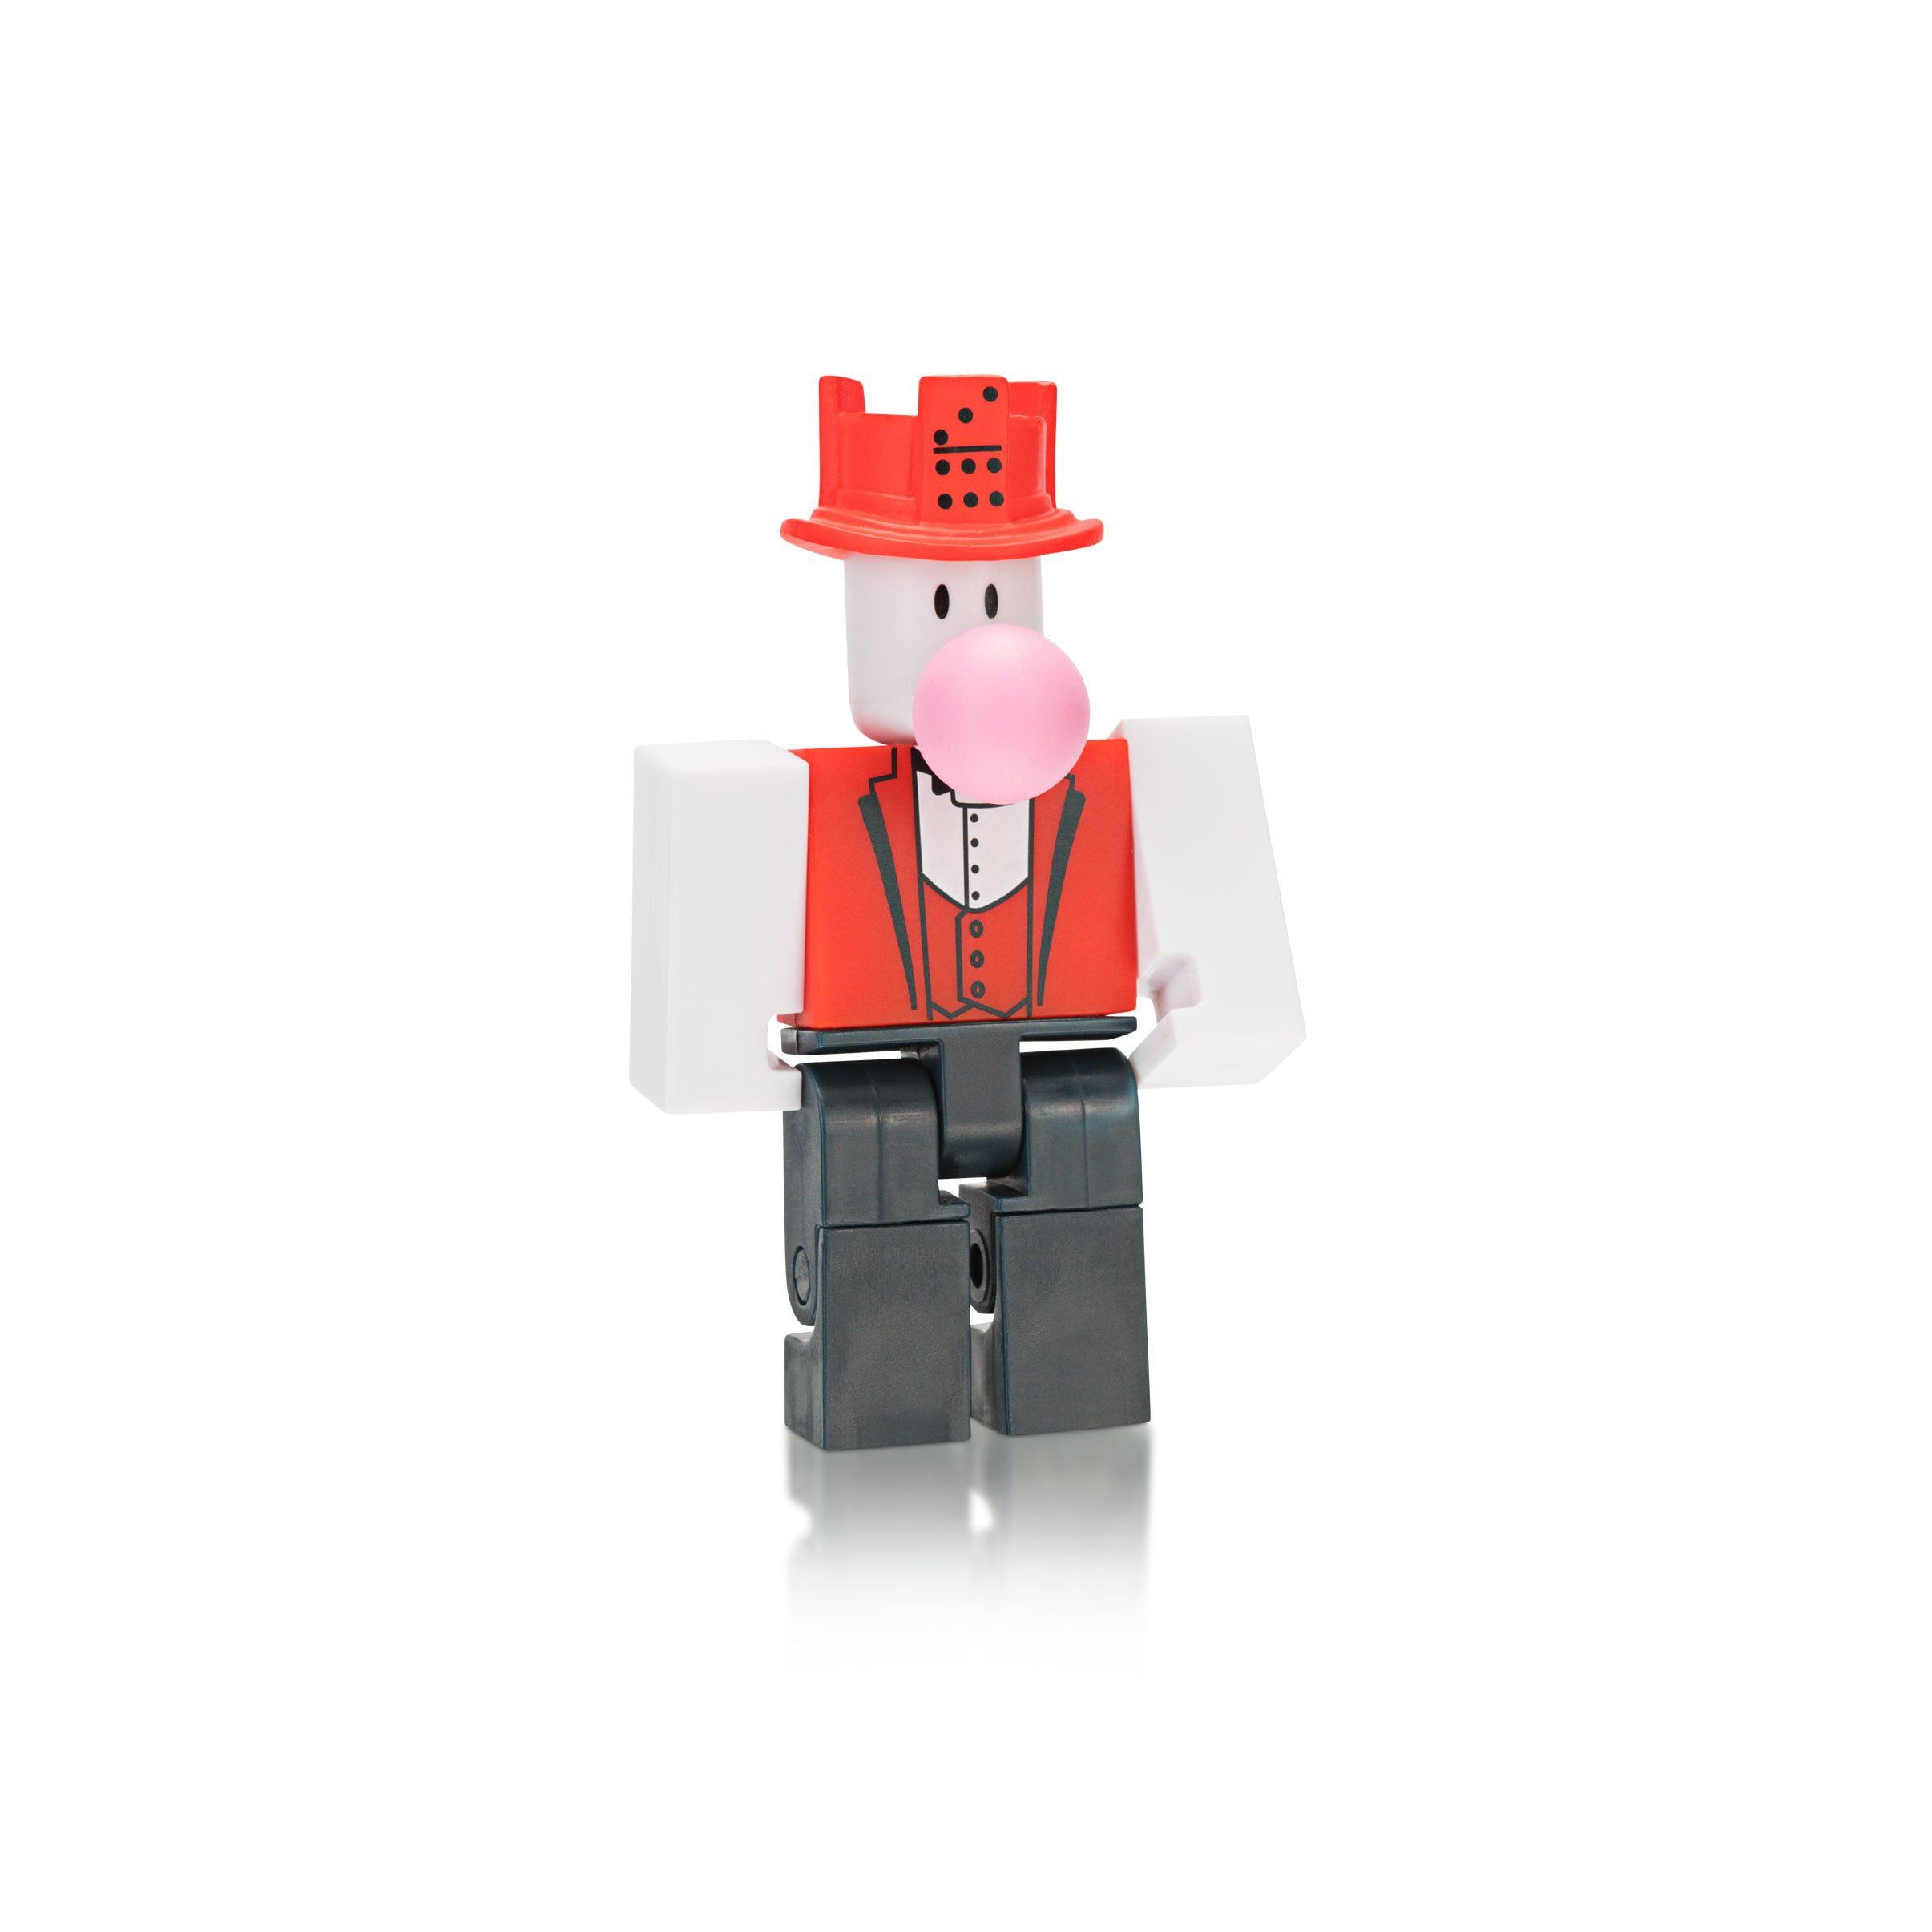 Roblox Action Collection Series 6 Mystery Figure Includes 1 Figure Exclusive Virtual Item Walmart Com Walmart Com - amazon com roblox celebrity mystery figure series 1 polybag of 6